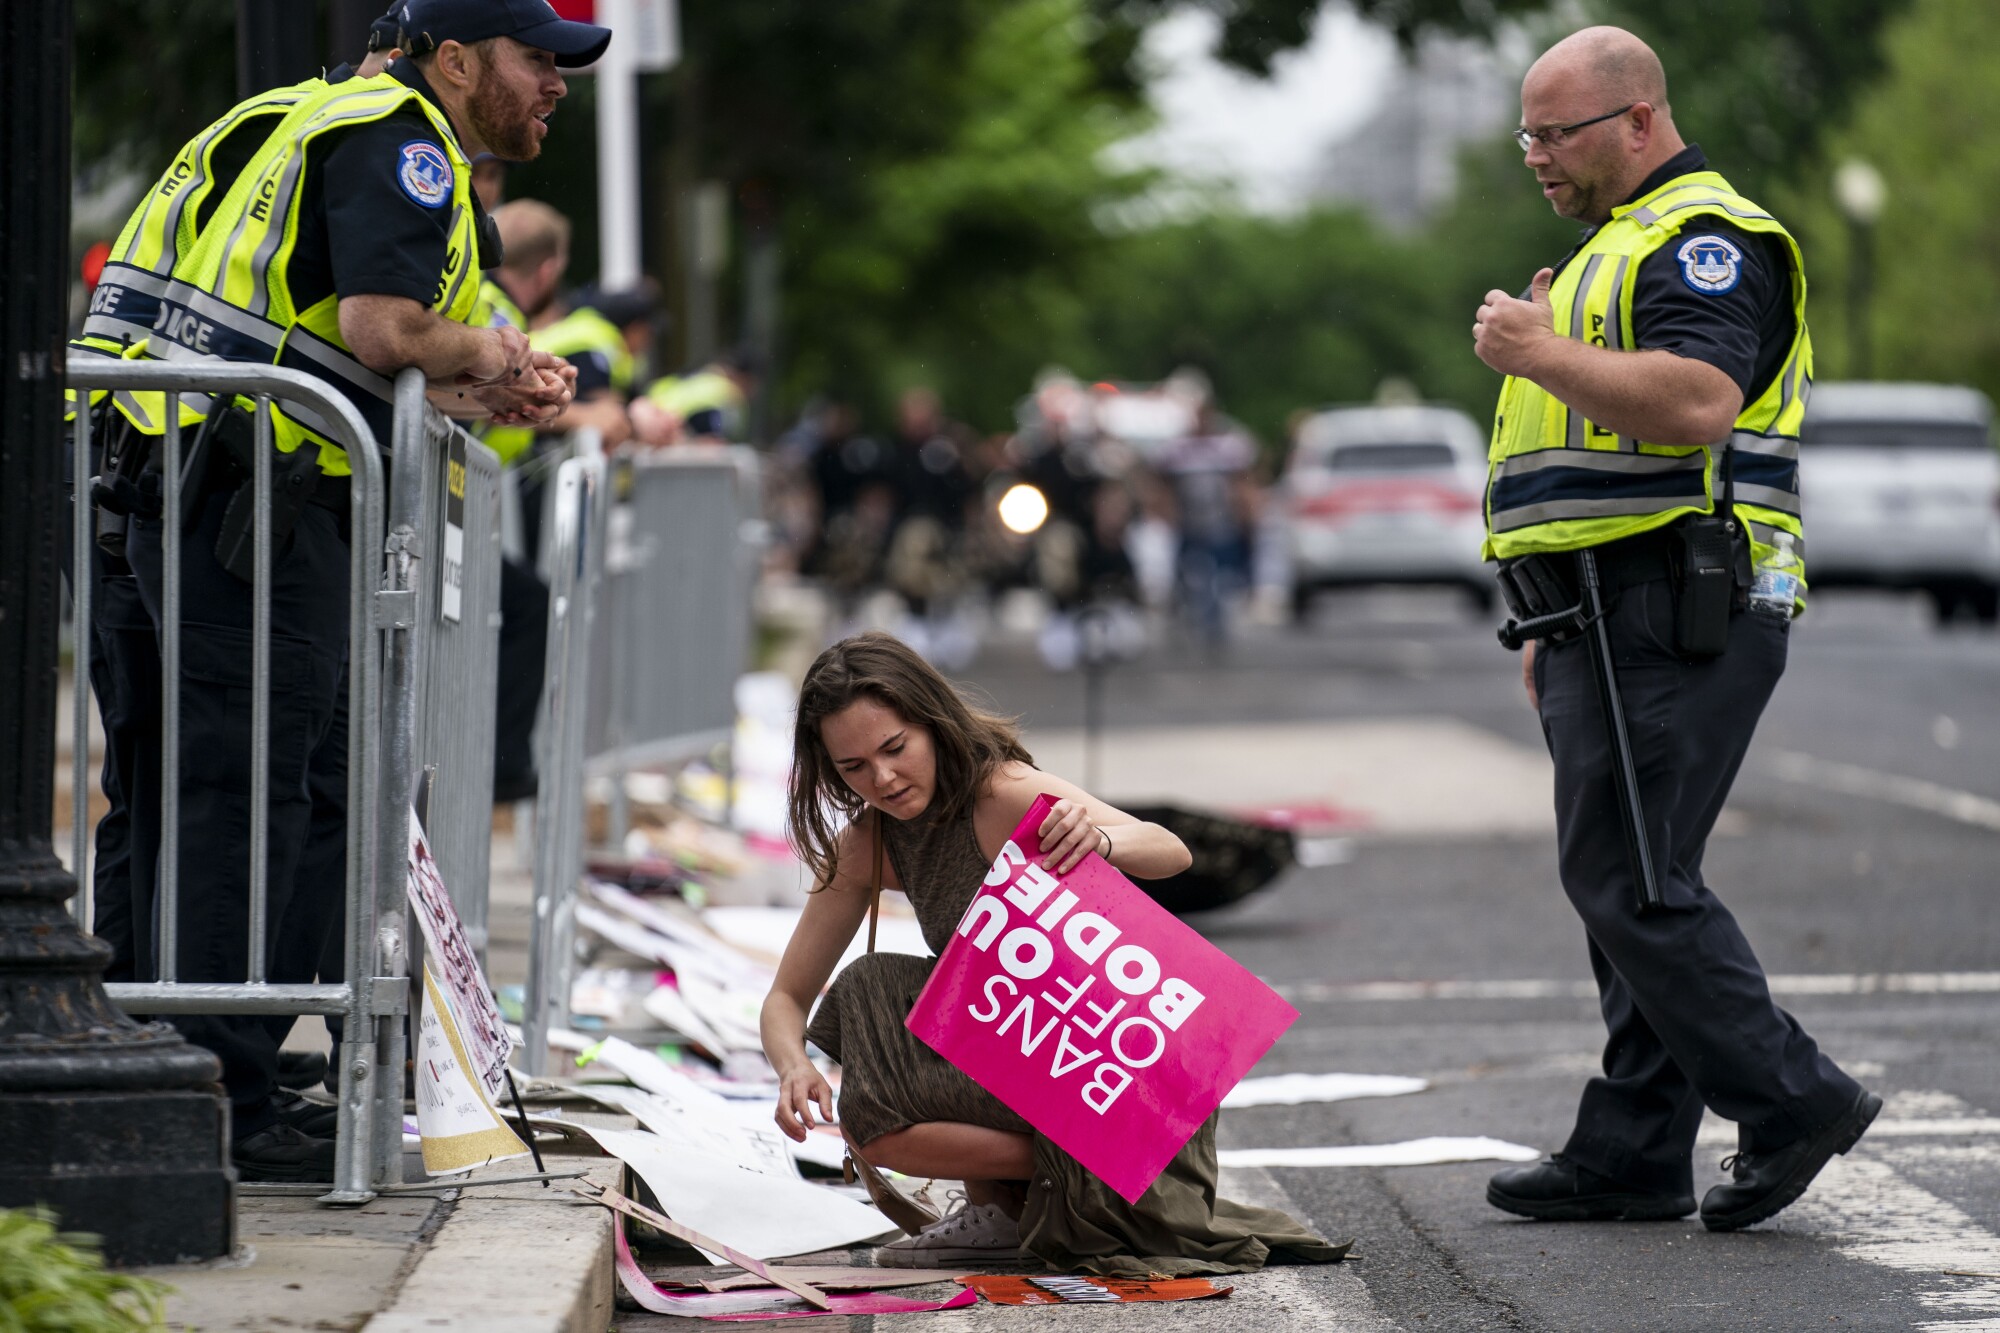     A protester puts up signs again at the barricades after Capitol Police officers removed the signs.